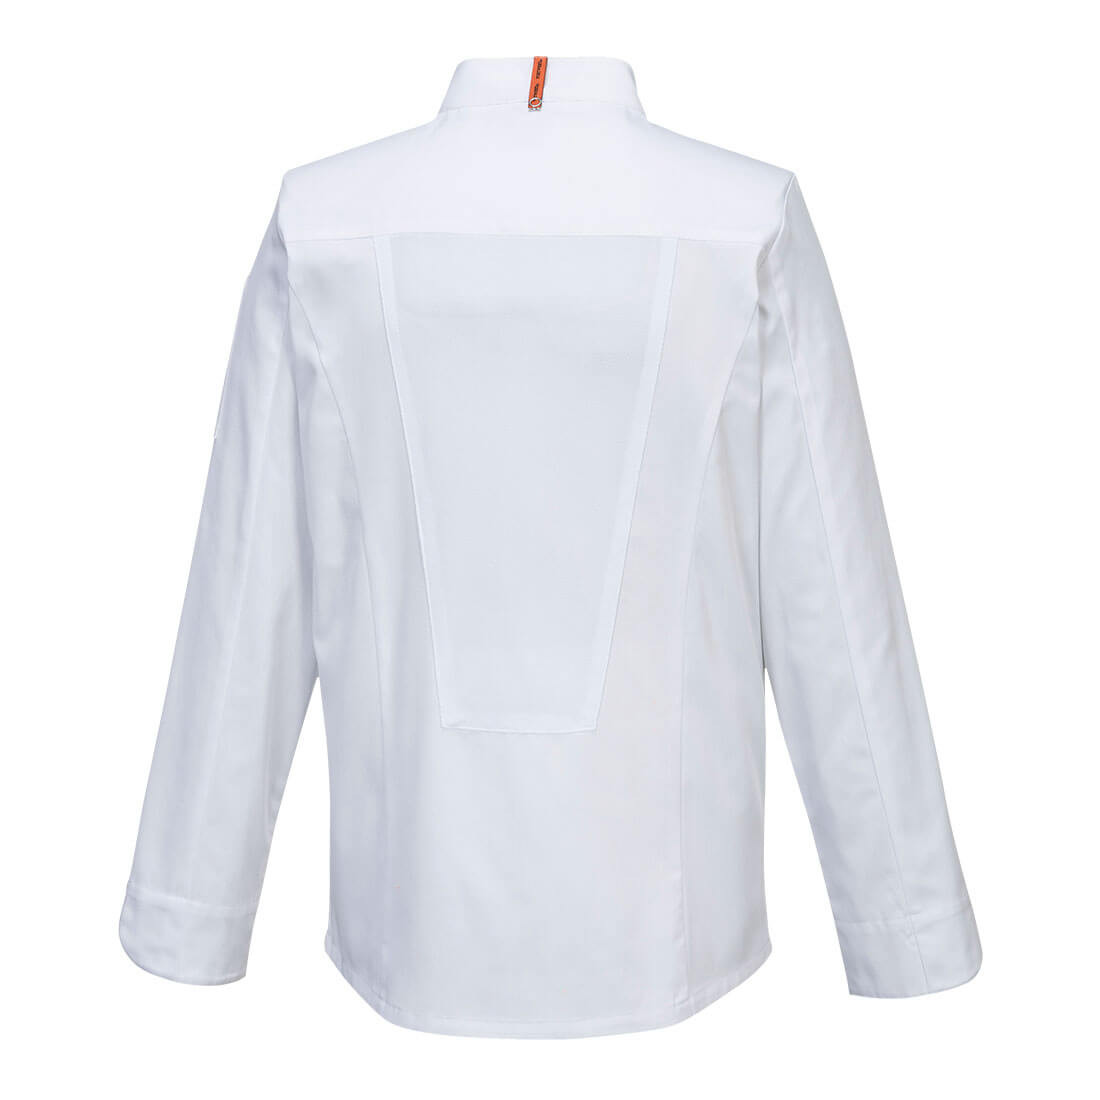 Stretch Mesh Air Pro Long Sleeve Jacket - Safetywear